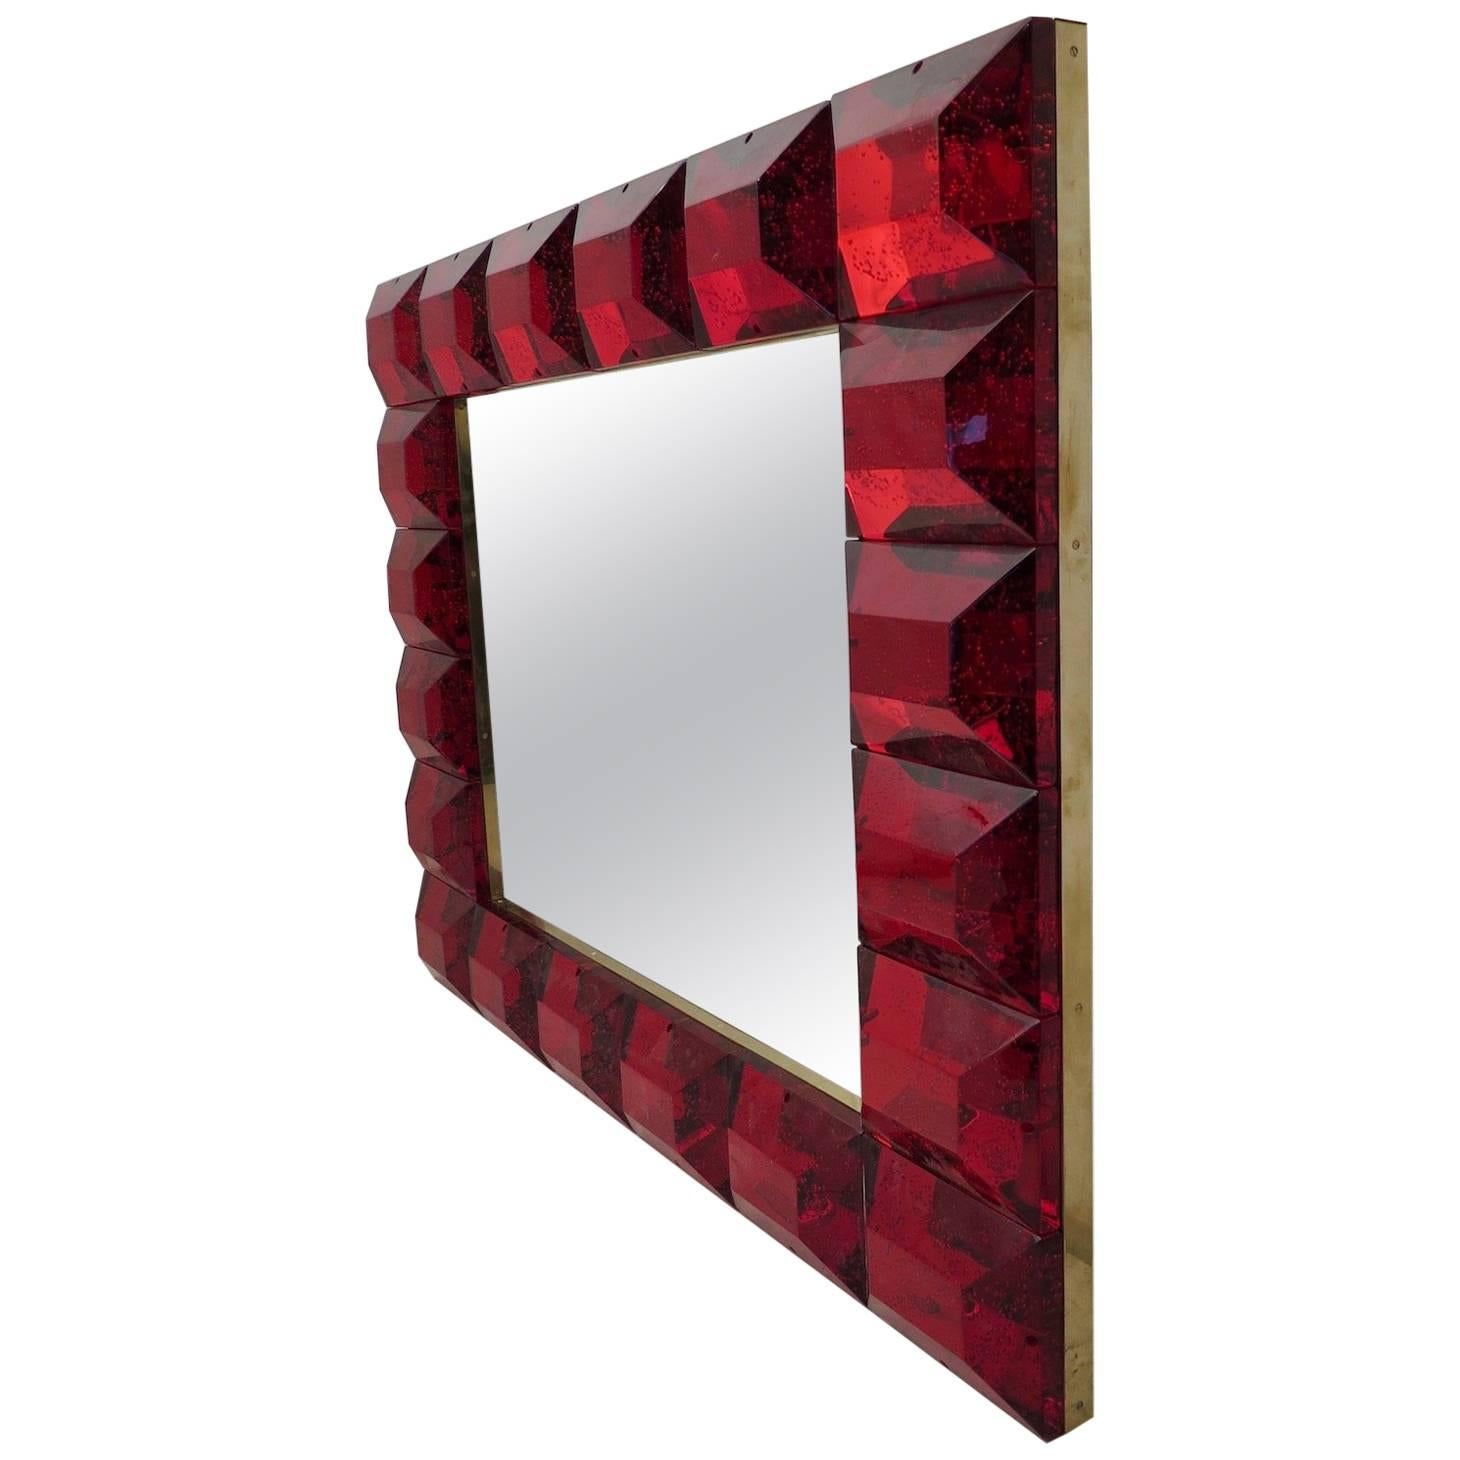 A strong purple red frame, reach the eye of the beholder, leaving him entranced; of Murano red art glass wall mirror. 

The structure of the wall mirror is in wood, where the red Murano glass is housed. The frame of the mirror is made up of a series